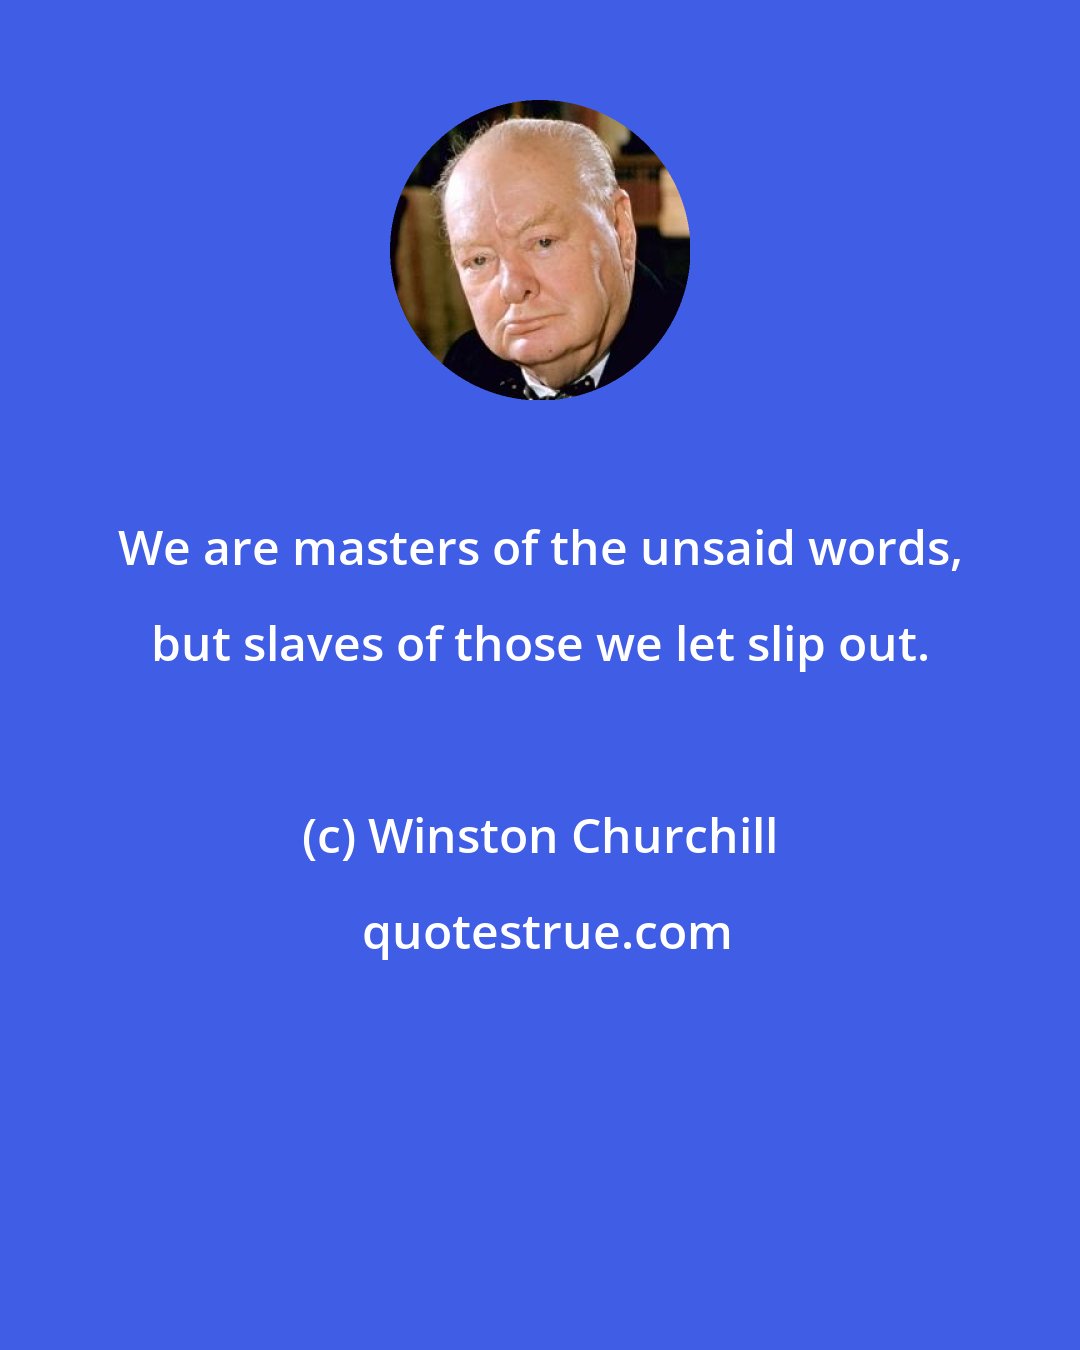 Winston Churchill: We are masters of the unsaid words, but slaves of those we let slip out.